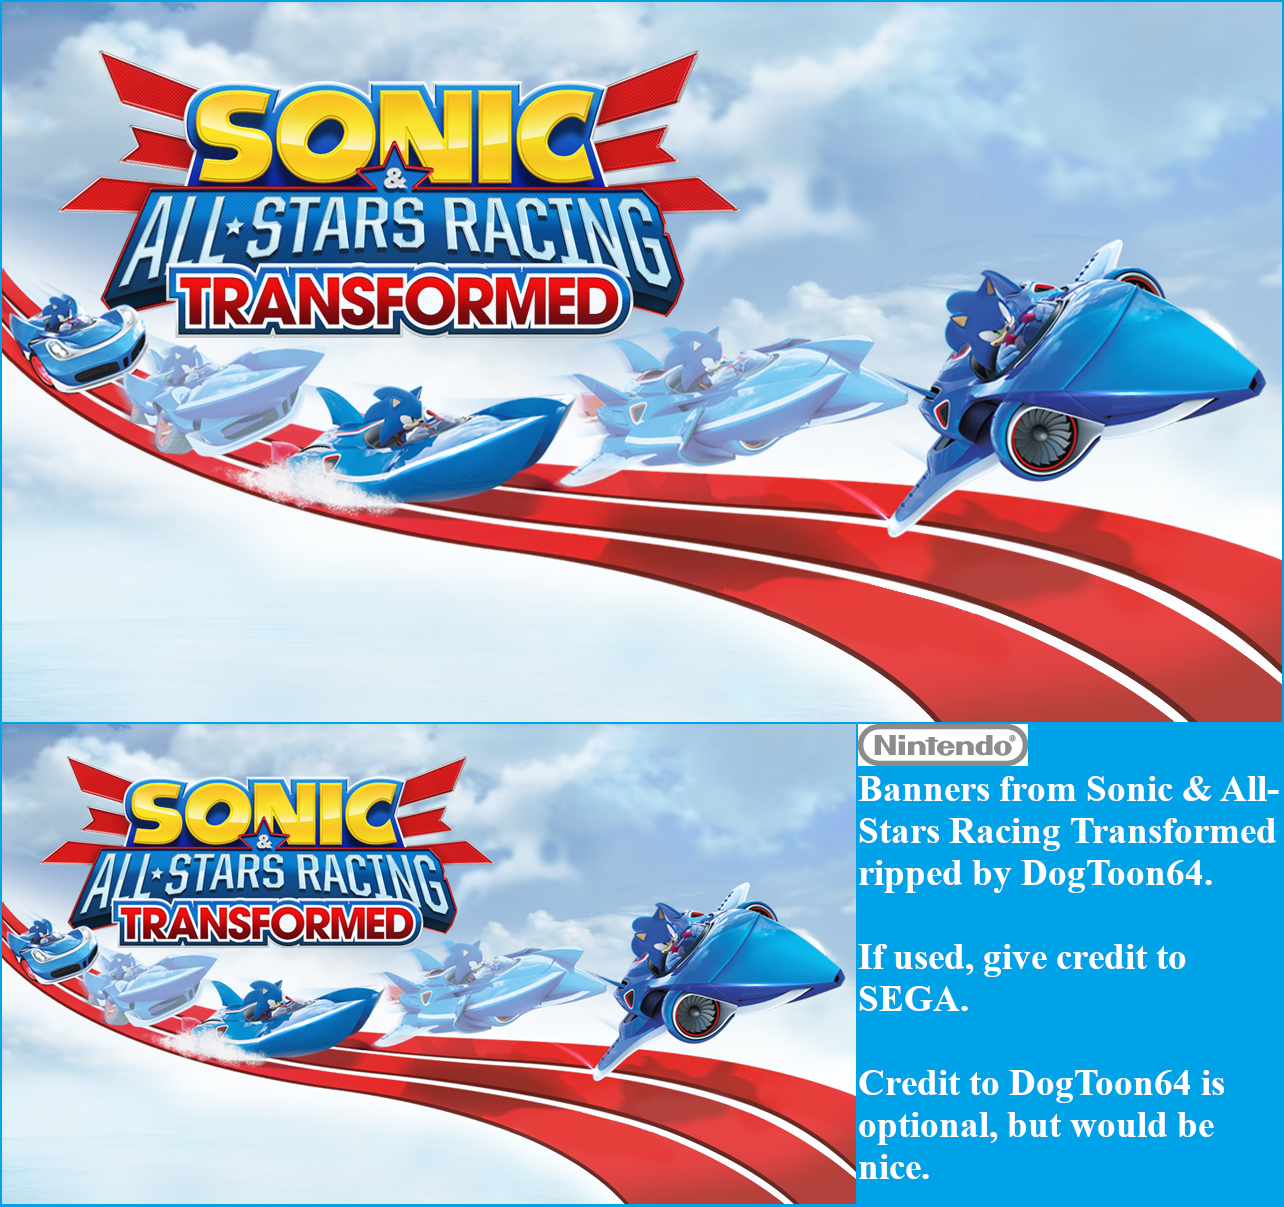 Sonic & All-Stars Racing Transformed - Banners